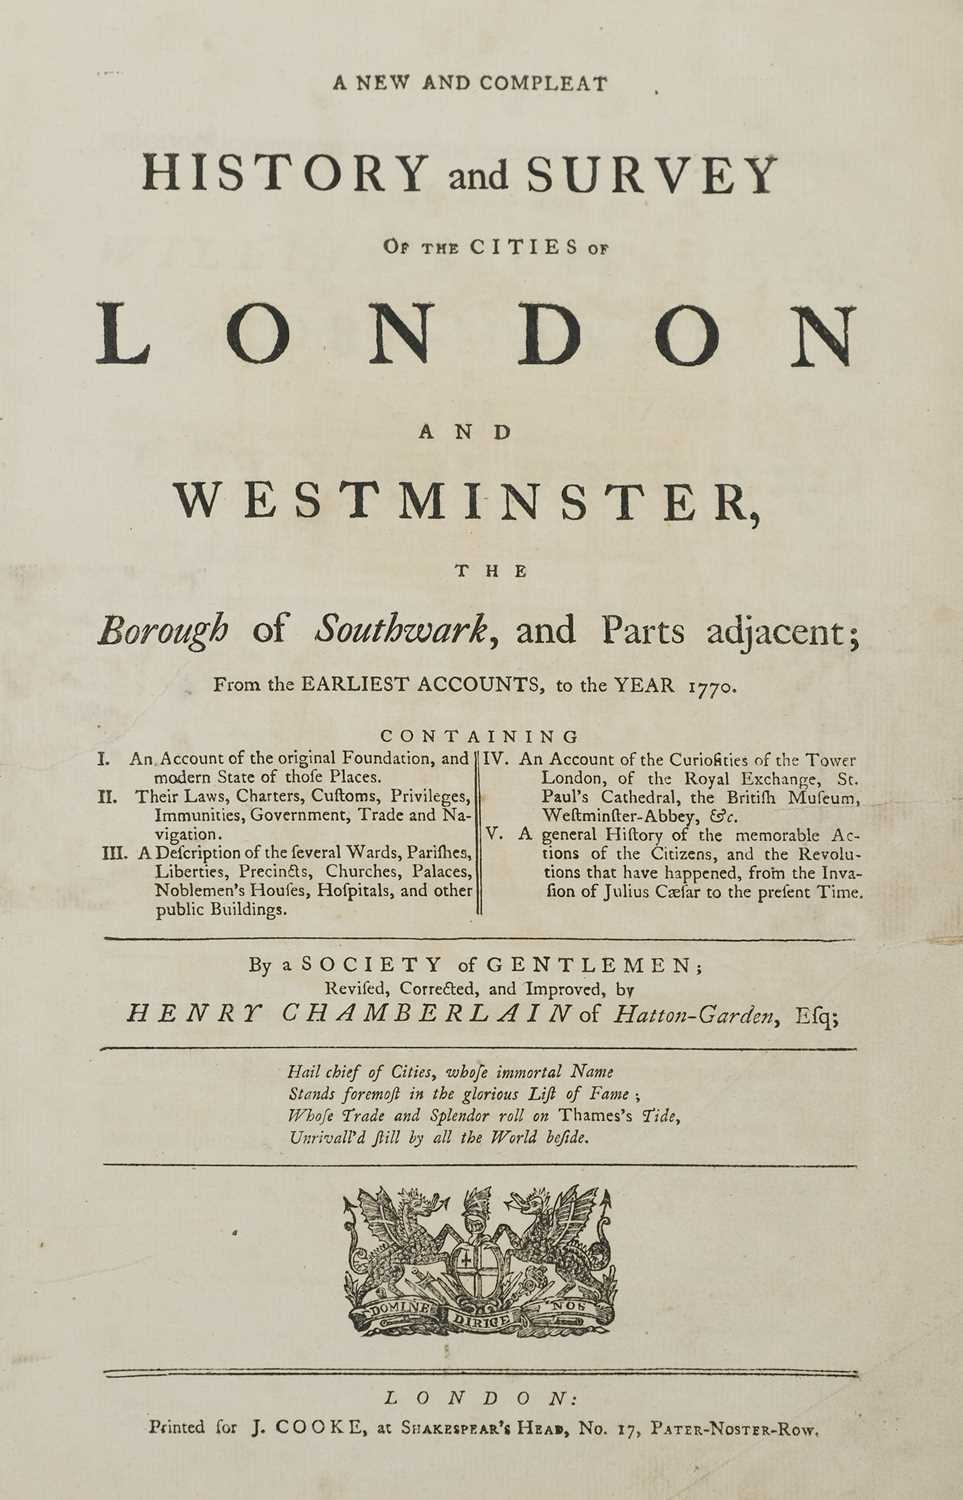 Lot 42 - Chamberlain (Henry). A New and Compleat History of the Cities of London and Westminster, [1770]